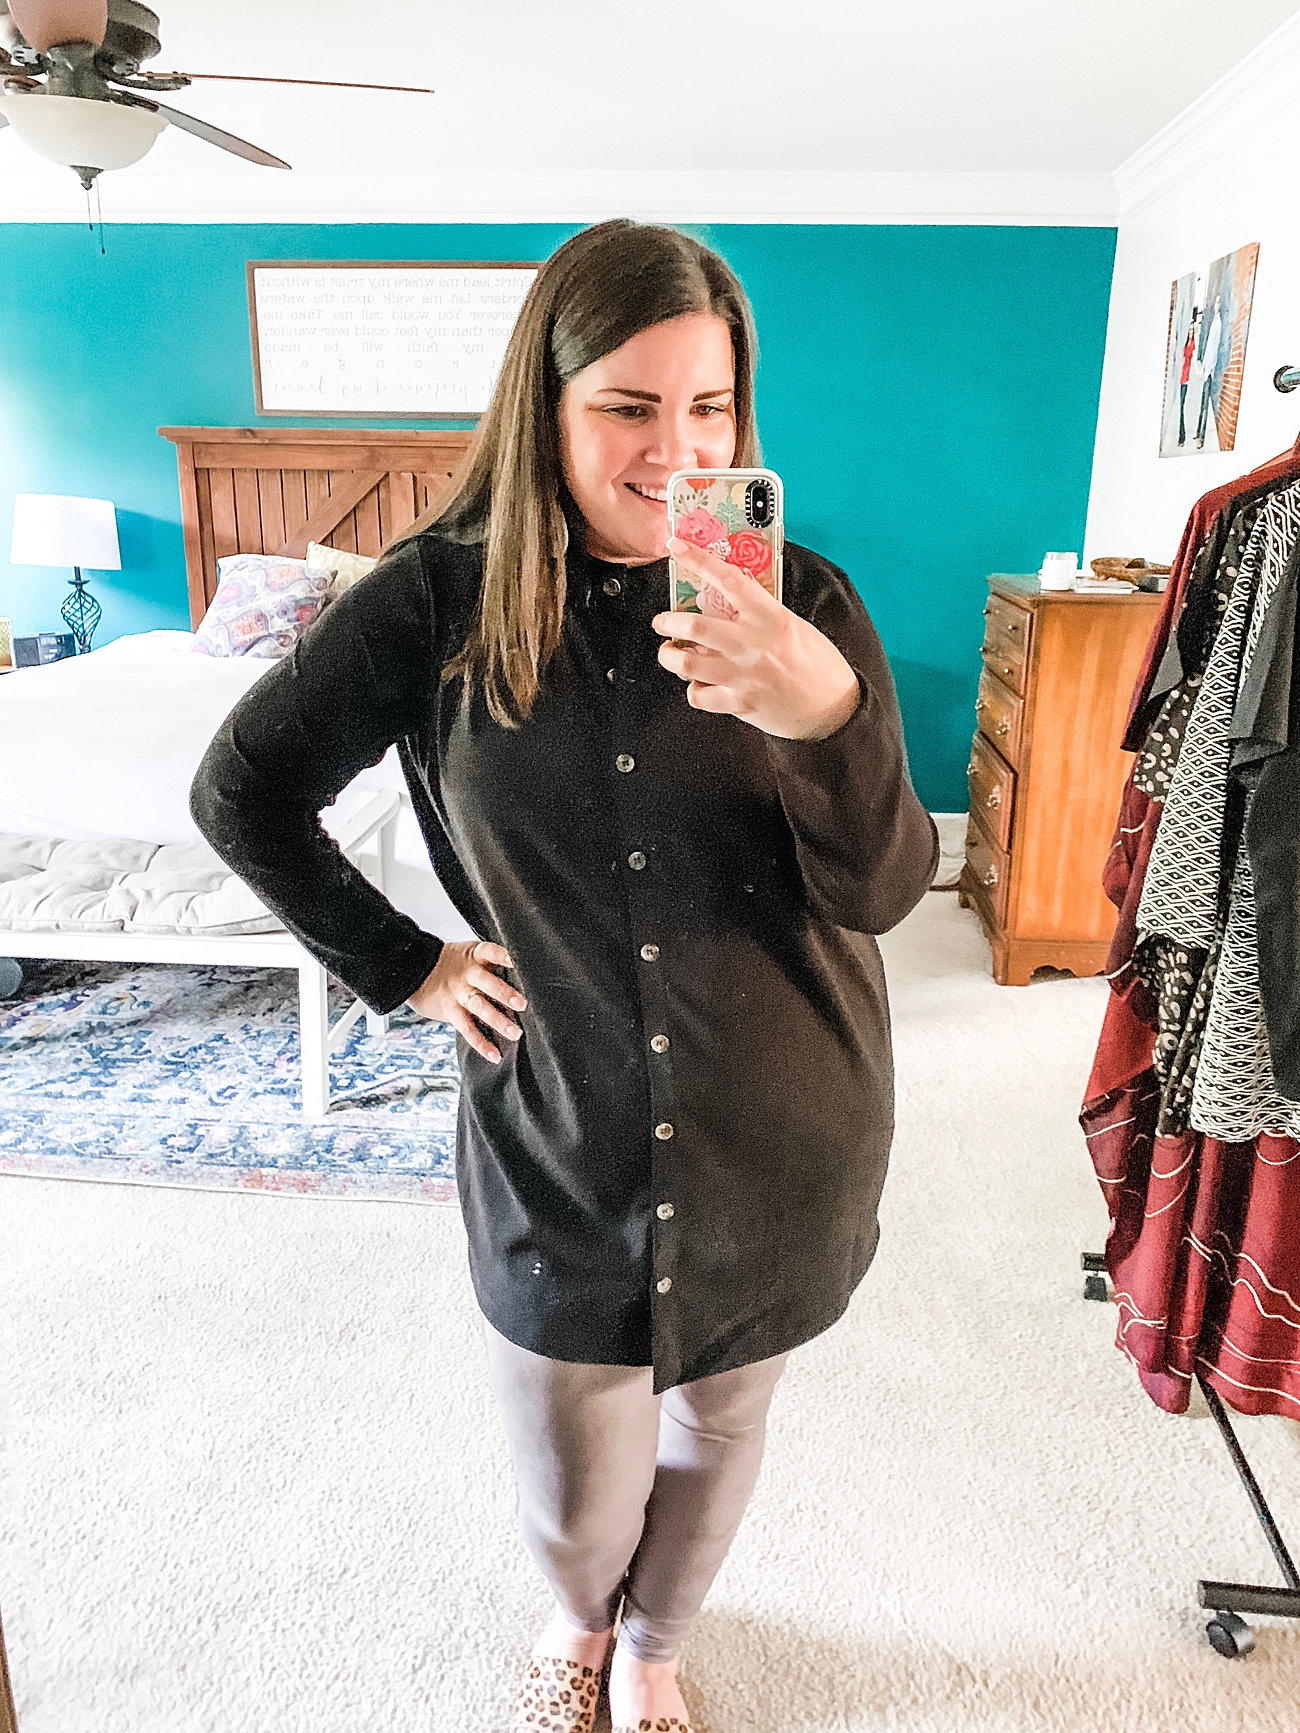 Sseko Designs Fall 2019 Sojourner Collection | Review + Try-On | Fair Trade Fashion #fairtradestyle #ethicalfashion http://www.ssekodesigns.com/mollystillman (9)